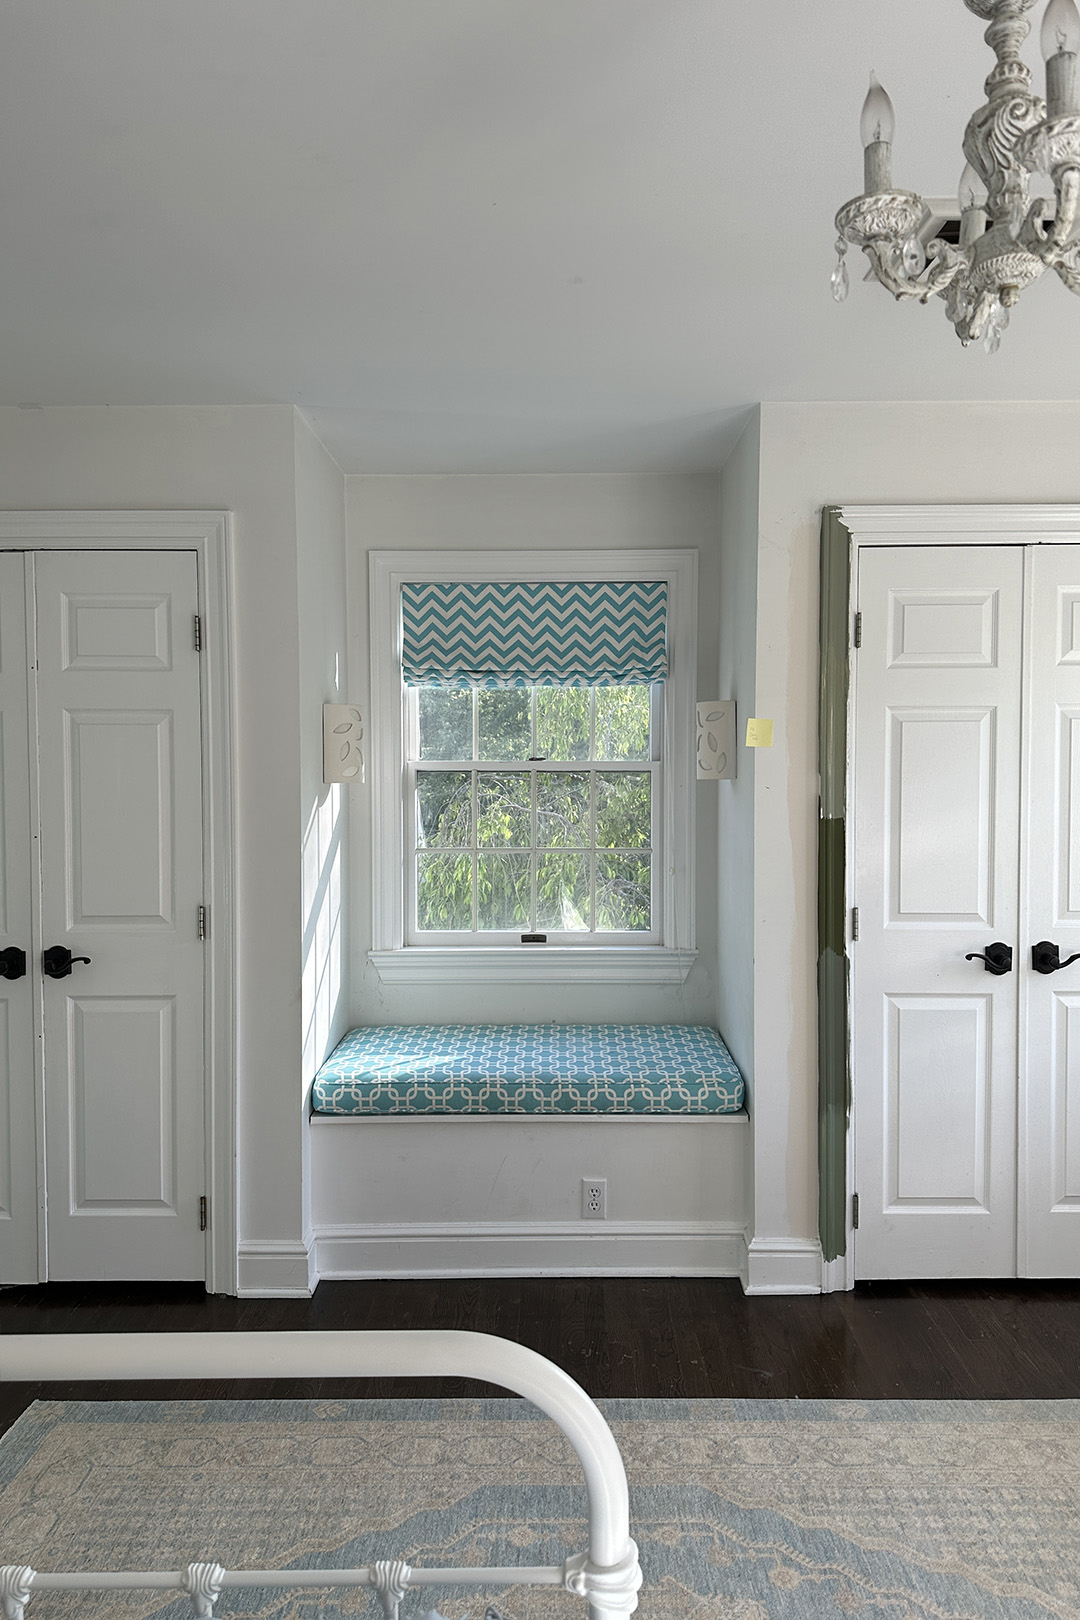 All-white room with two doors bookending a window.